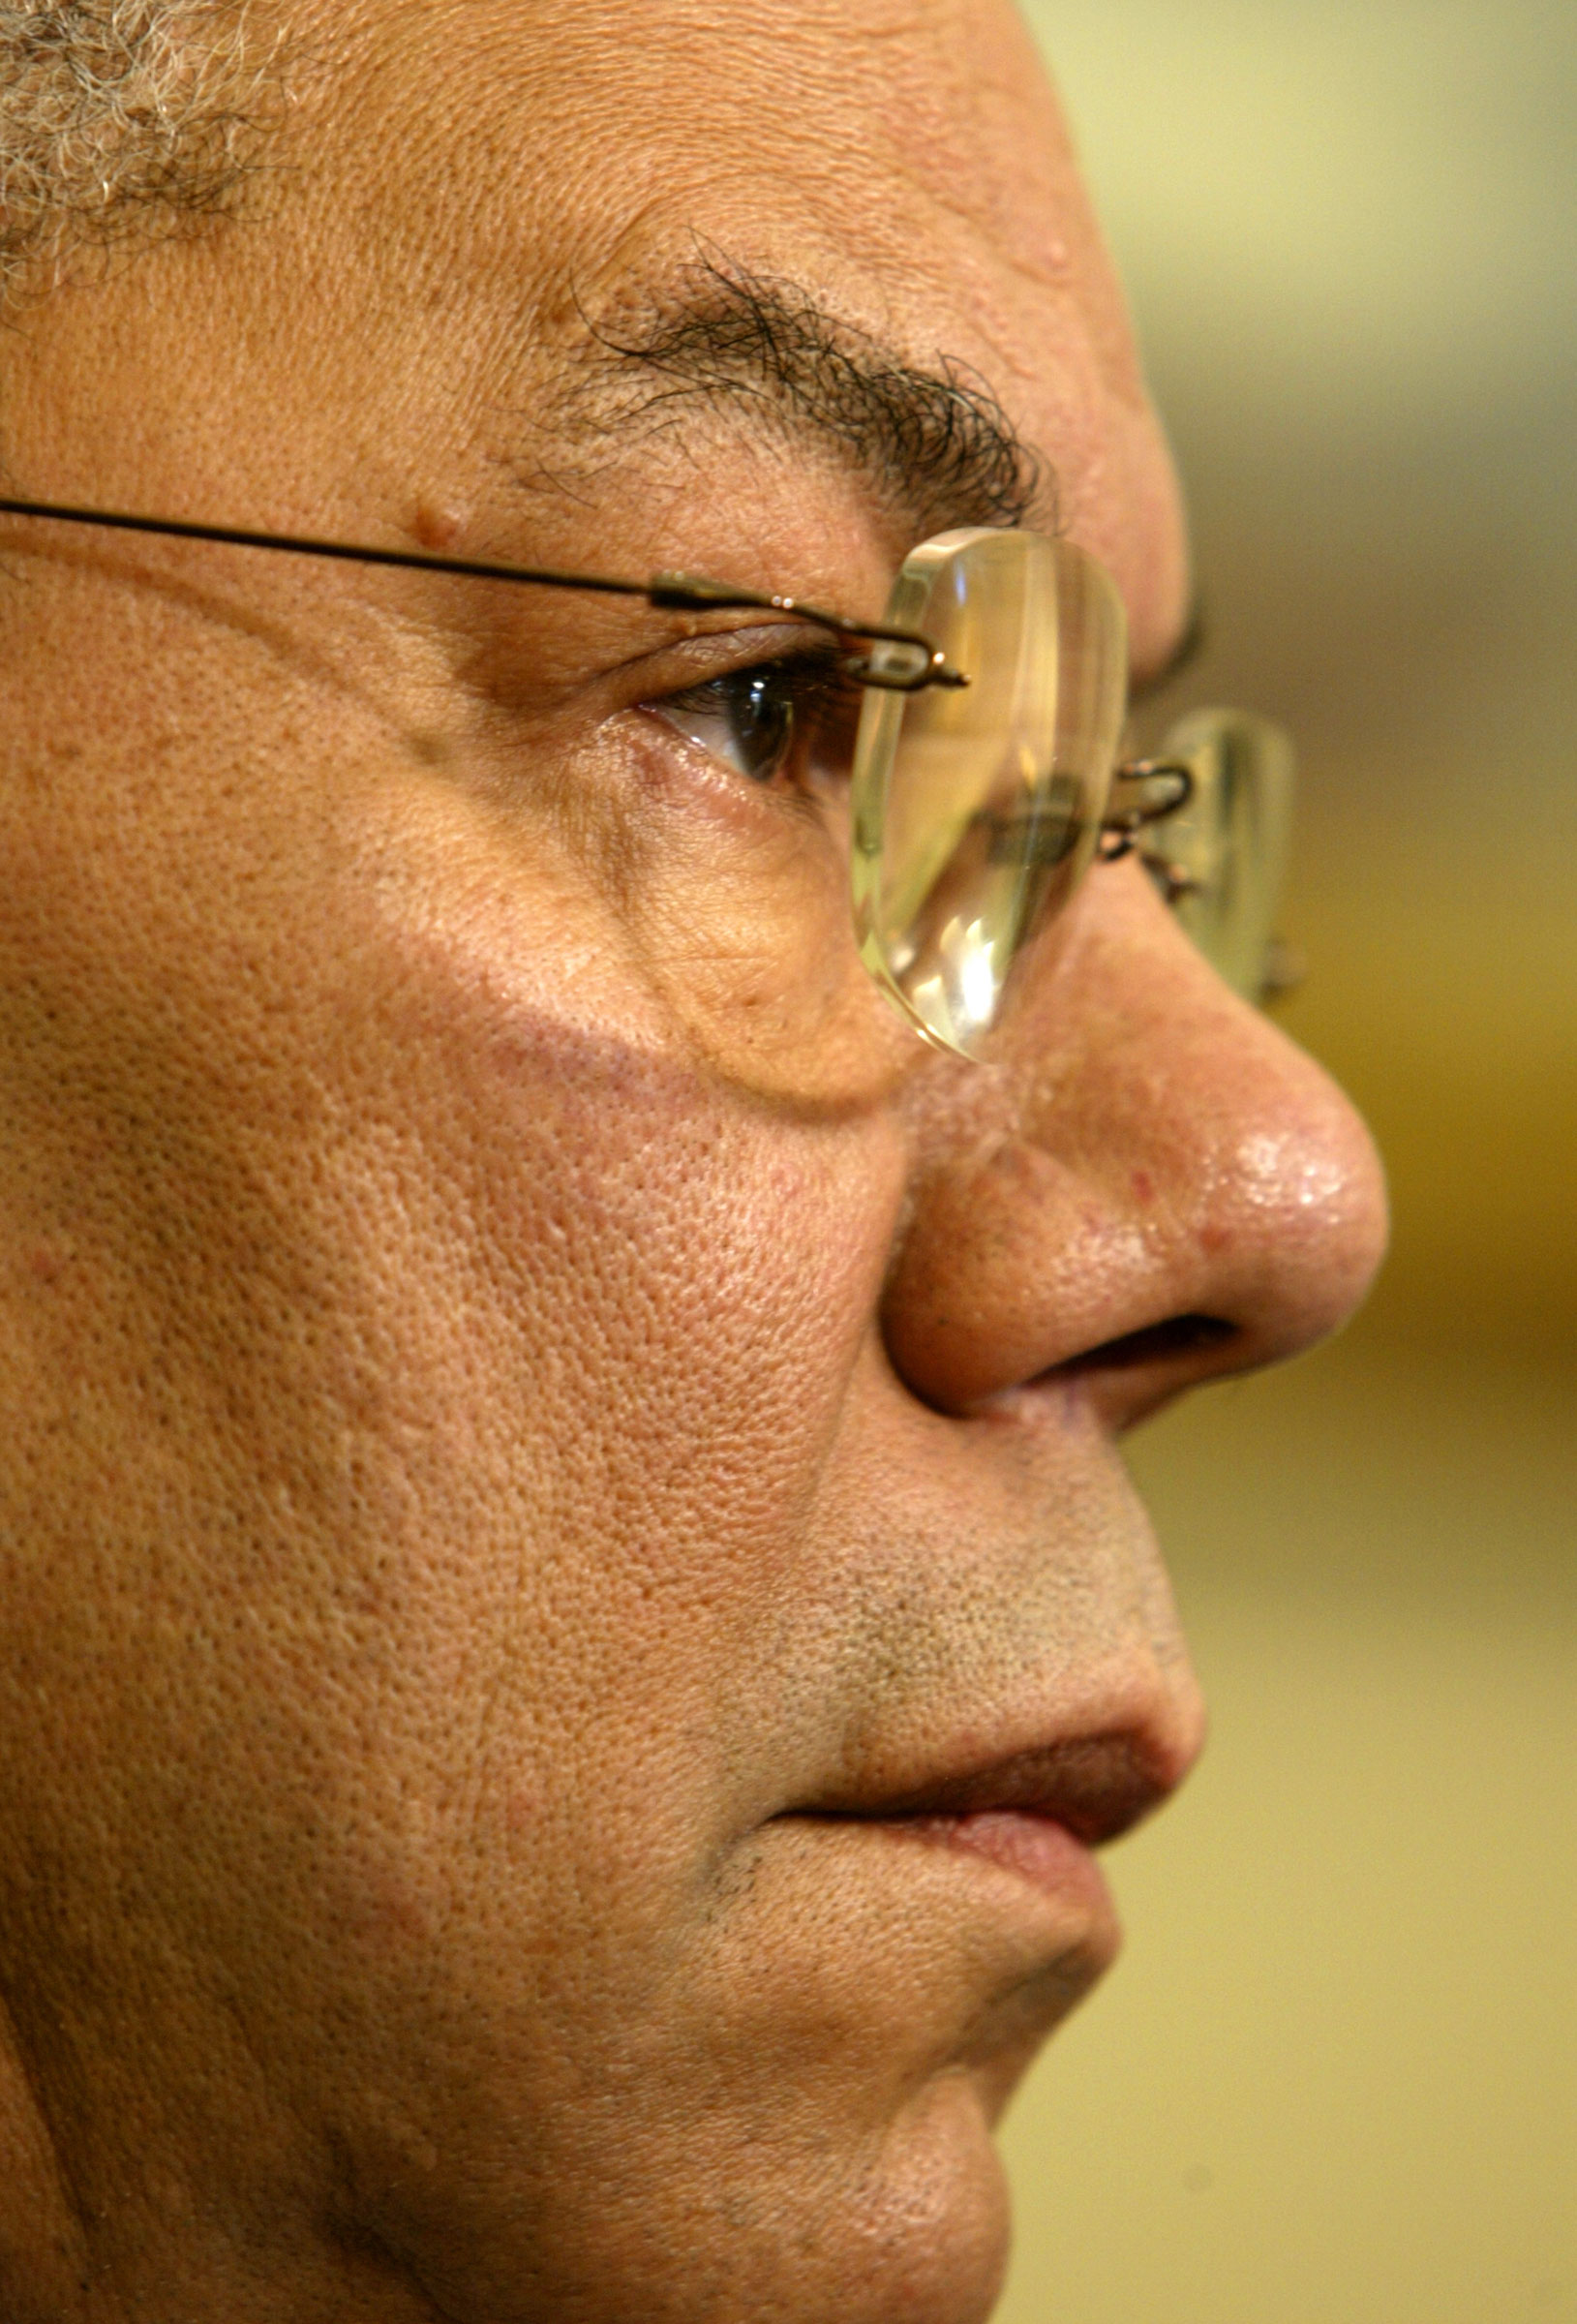 Secretary of State Colin Powell in the Oval Office 2002.